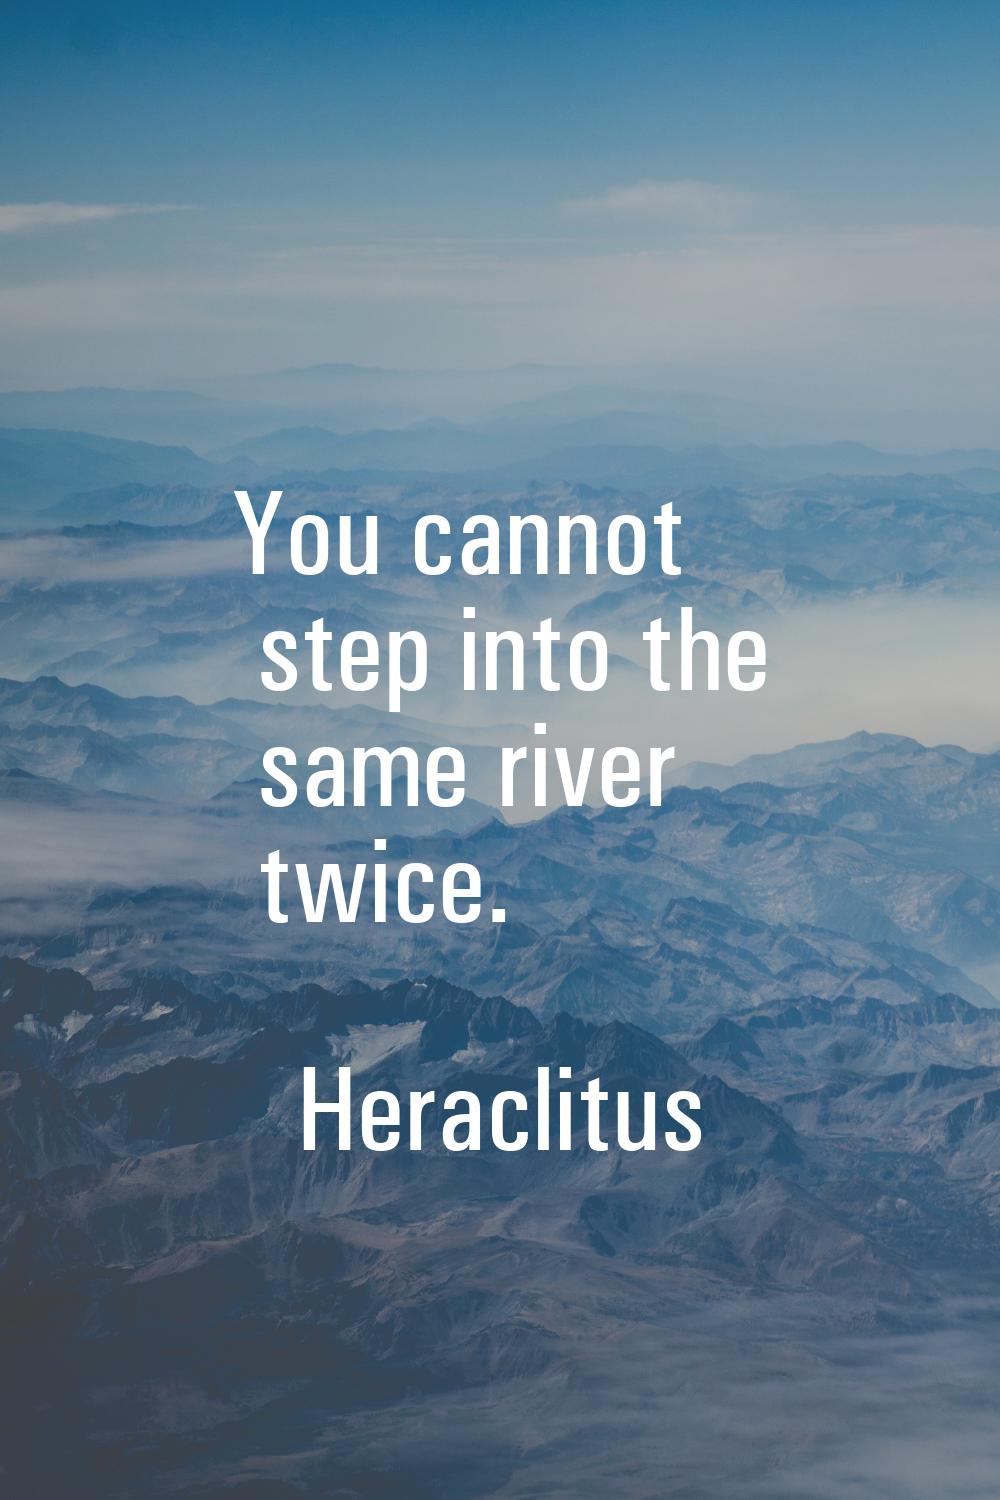 You cannot step into the same river twice.